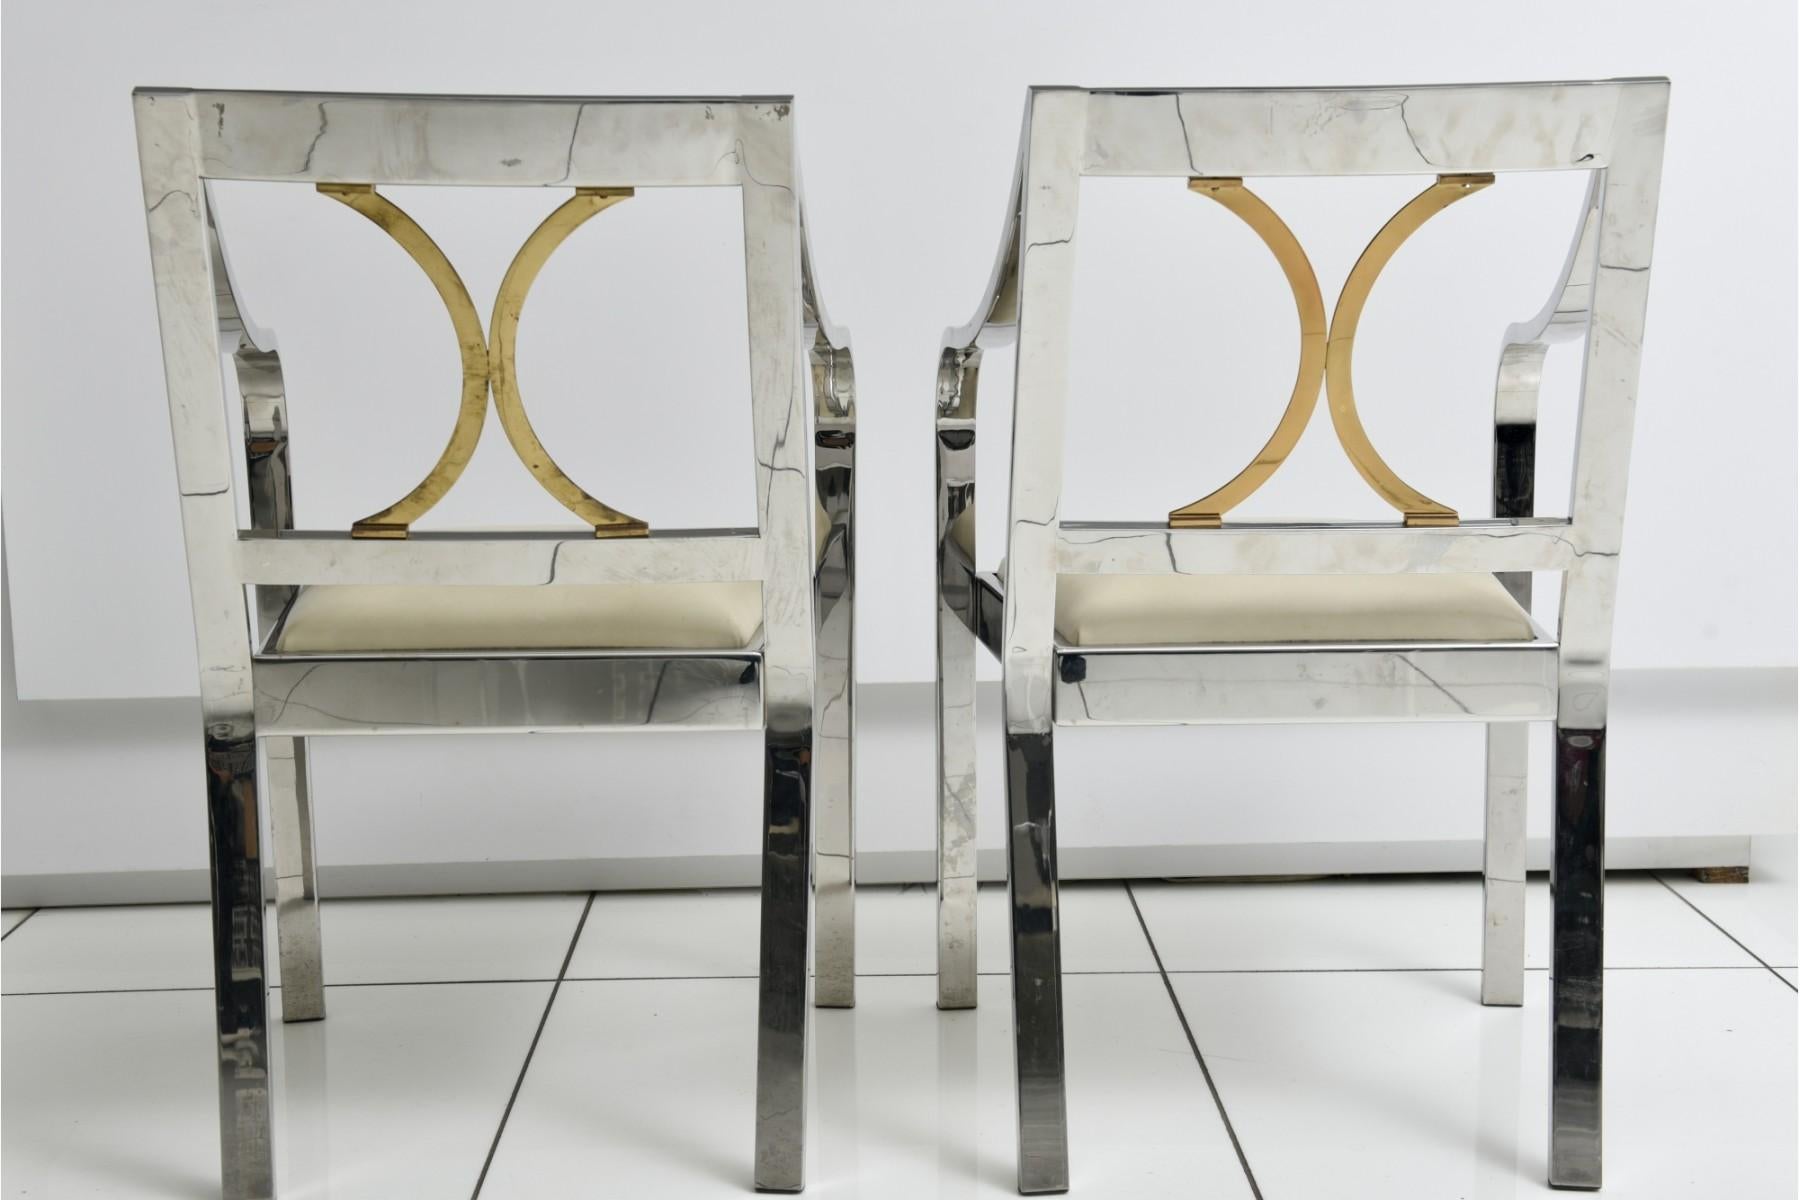 Polished Pair of Original Karl Springer Chairs, Stainless Steel and Brass